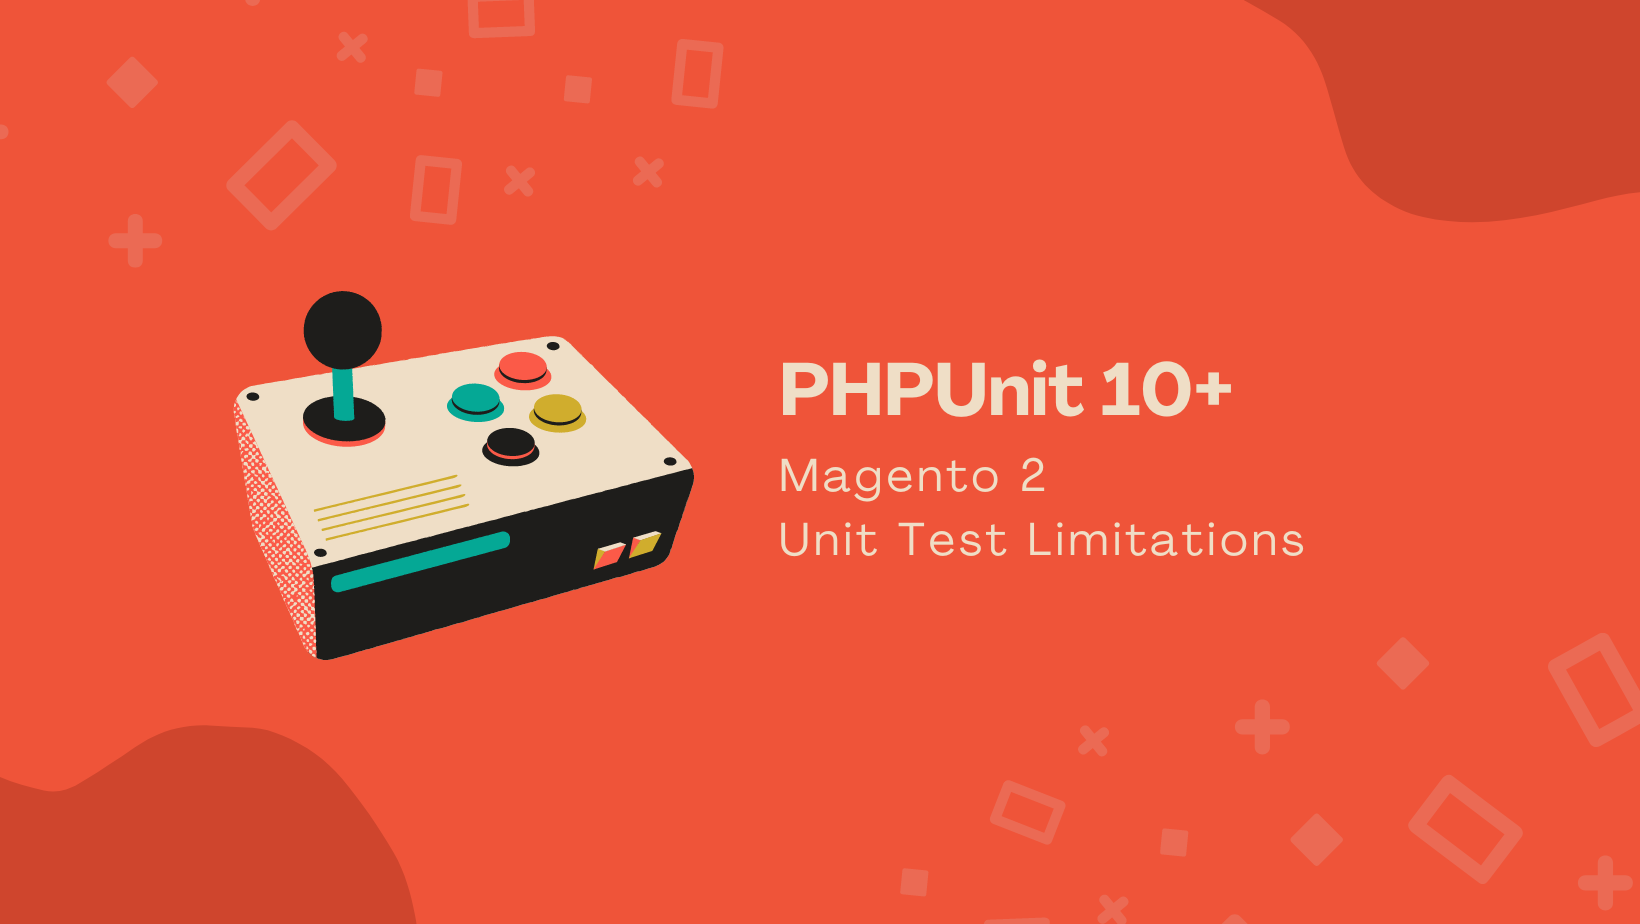 Unit Tests Limitations with Magento 2 and PHPUnit 10